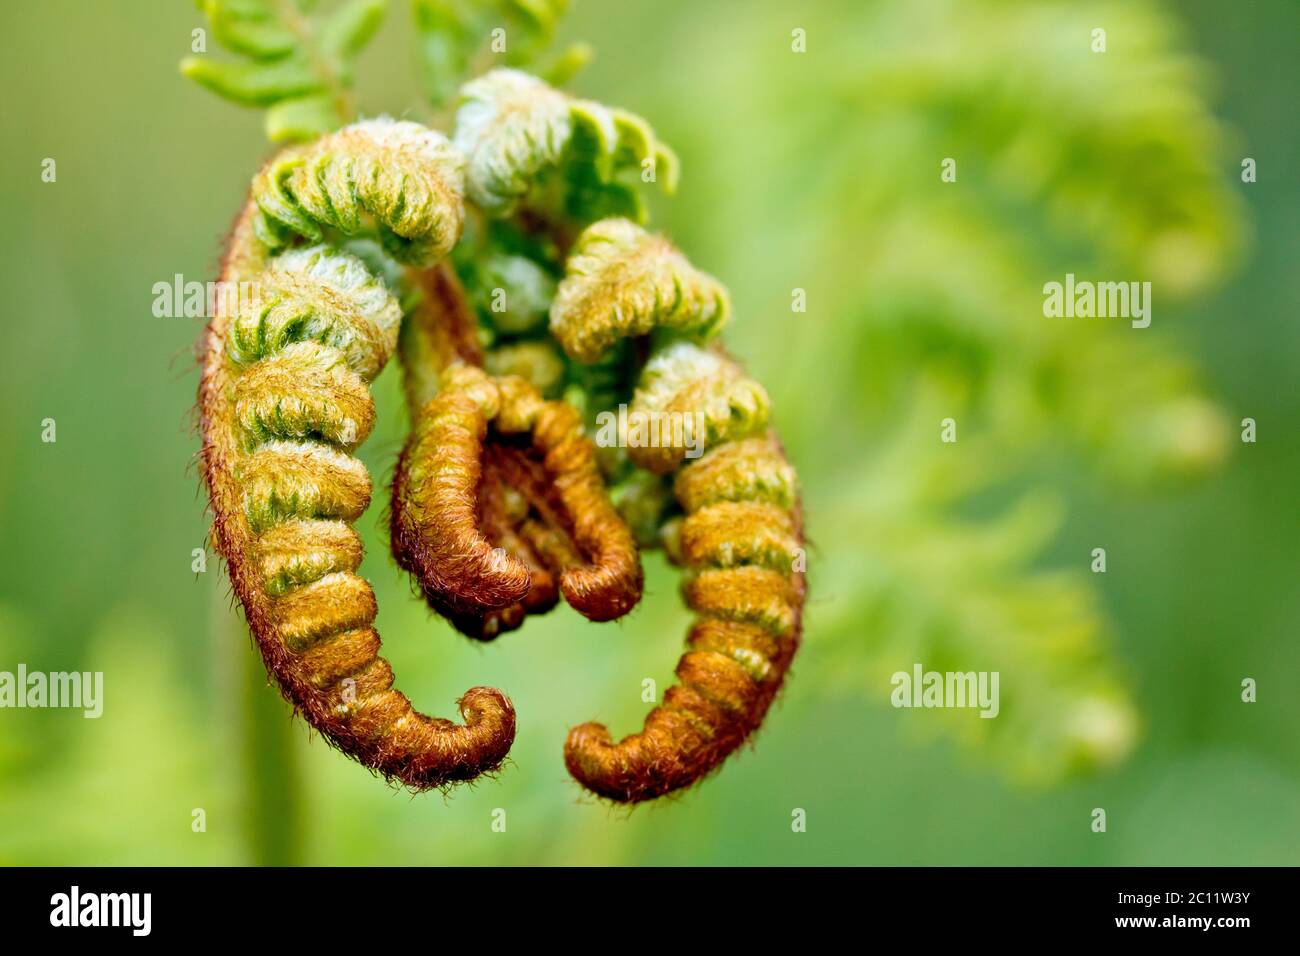 Bracken (pteridium aquilinum), close up of the head of the plant as the fronds begin to unfurl in spring, isolated against an out of focus background. Stock Photo